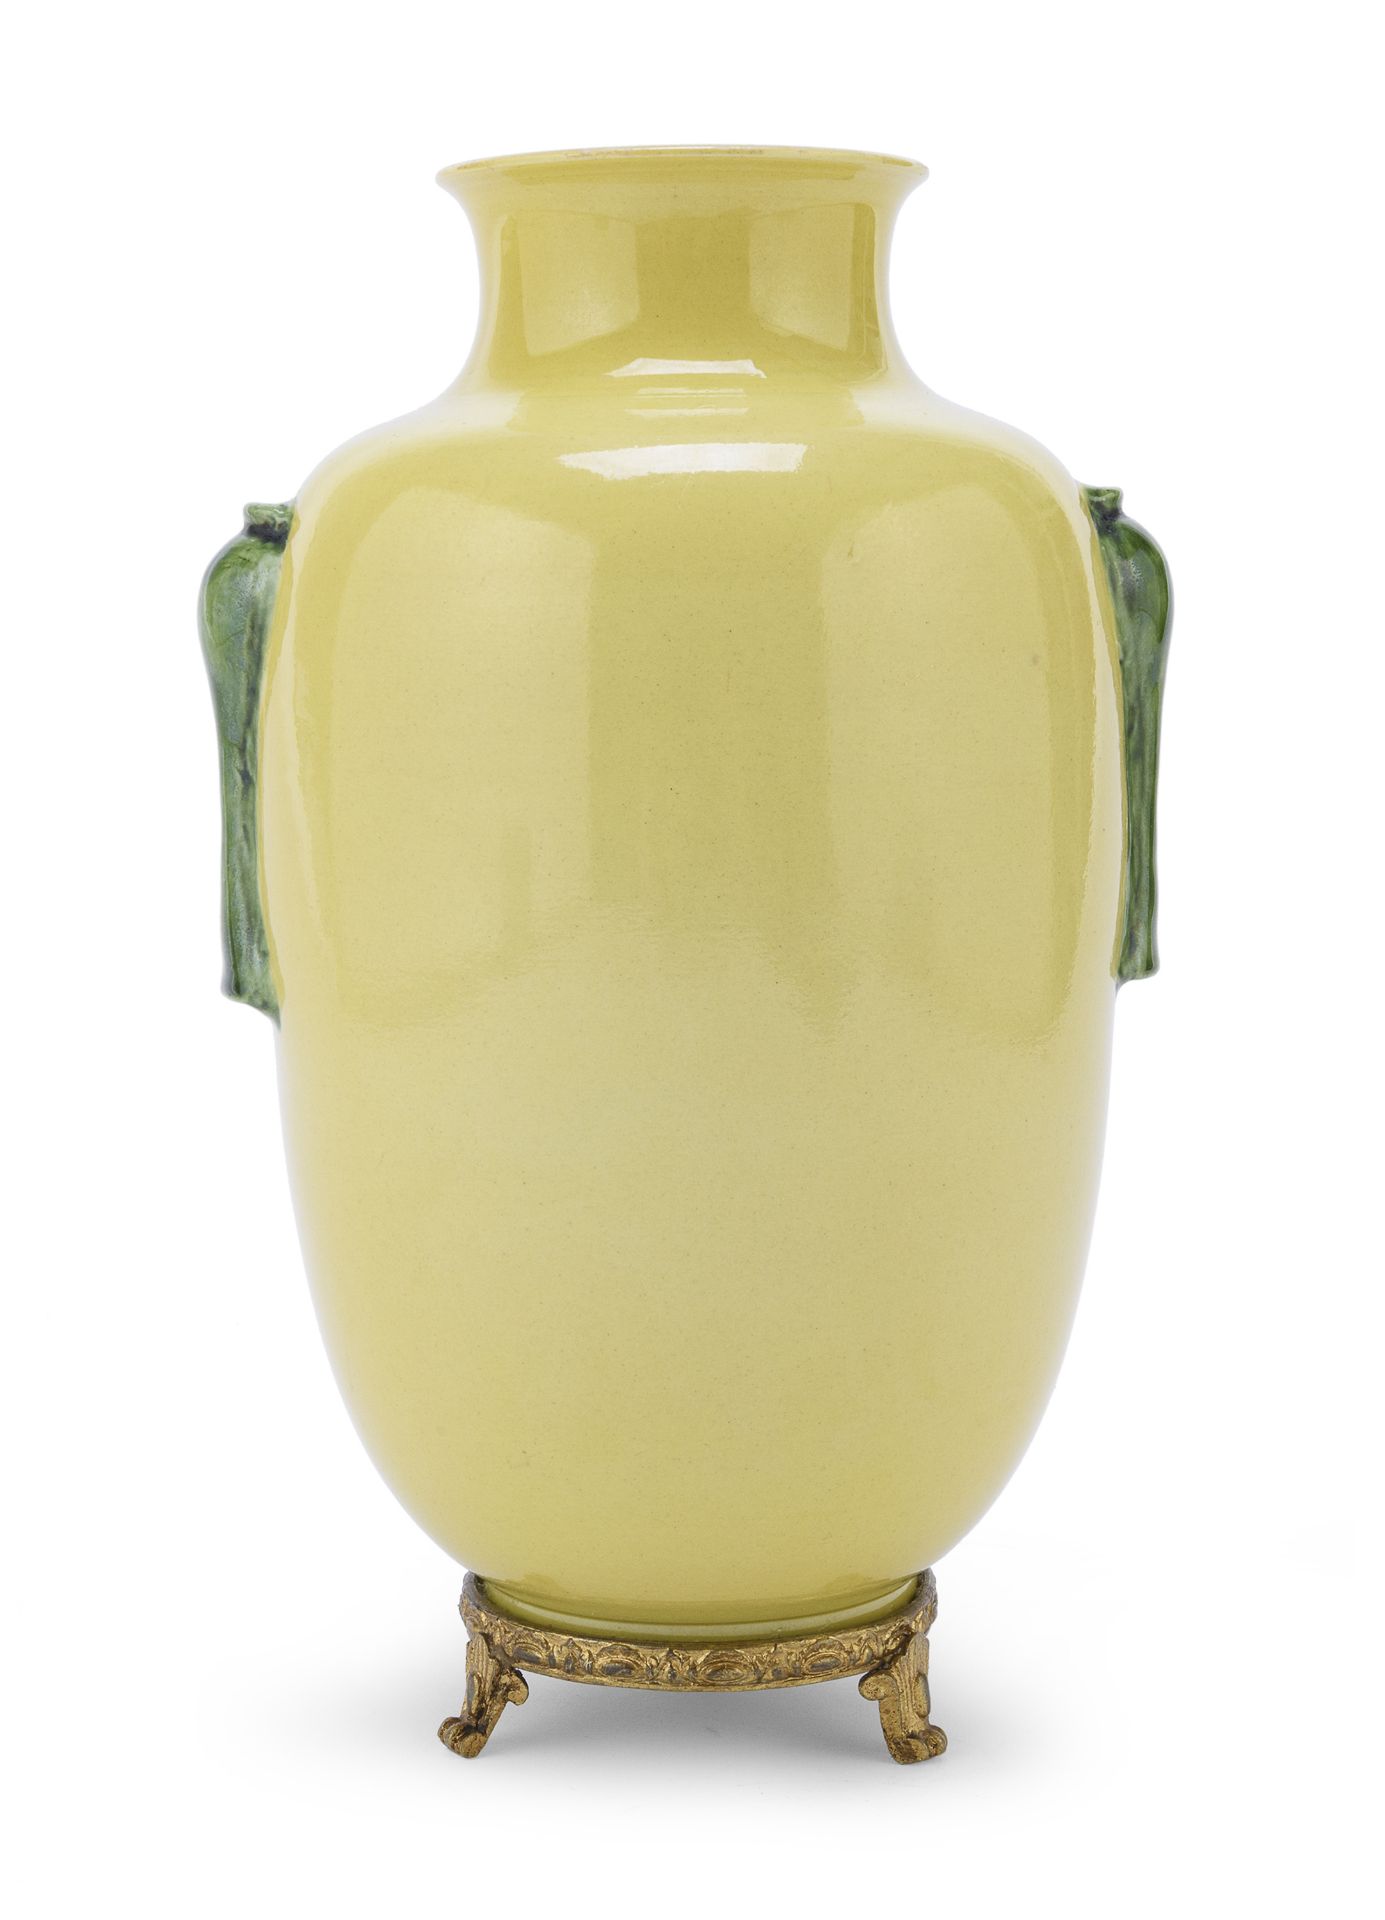 A YELLOW-GROUND PORCELAIN VASE CHINA LATE 19TH EARLY 20TH CENTURY